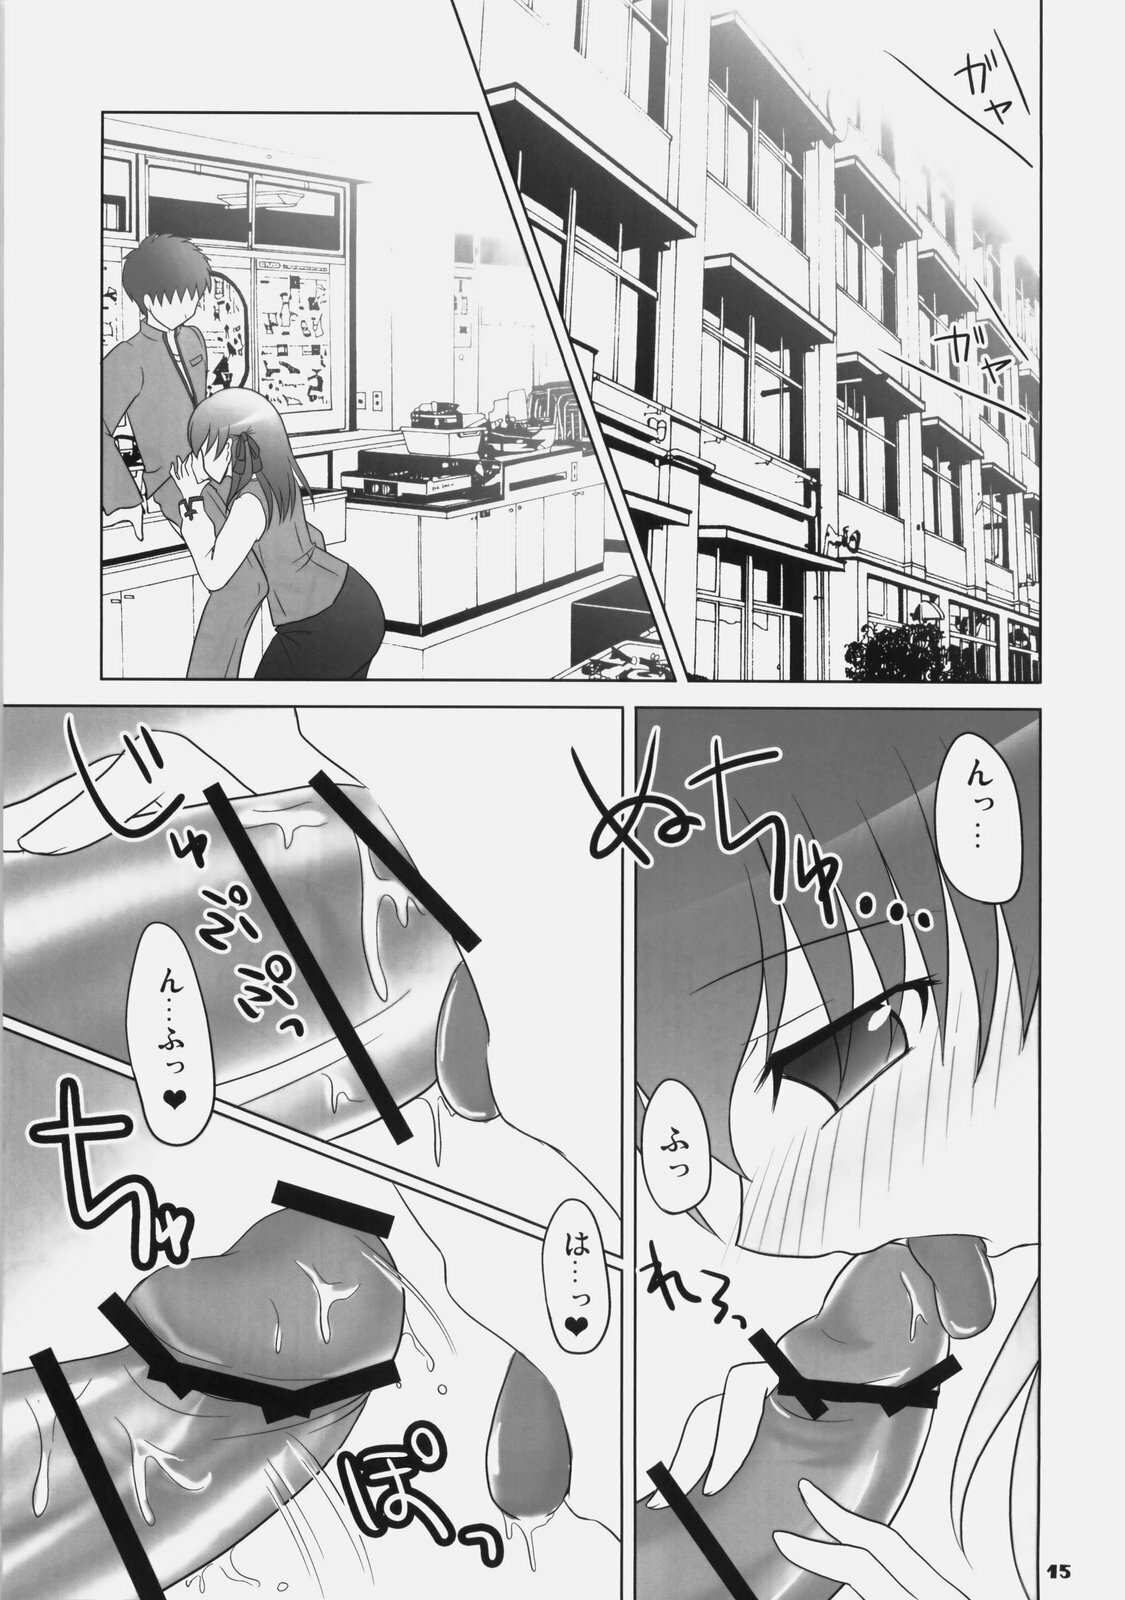 (C77) [Iron Plate (Yaki Ohagi)] Lunch Time! [2nd Edition] (Fate/stay night) page 14 full